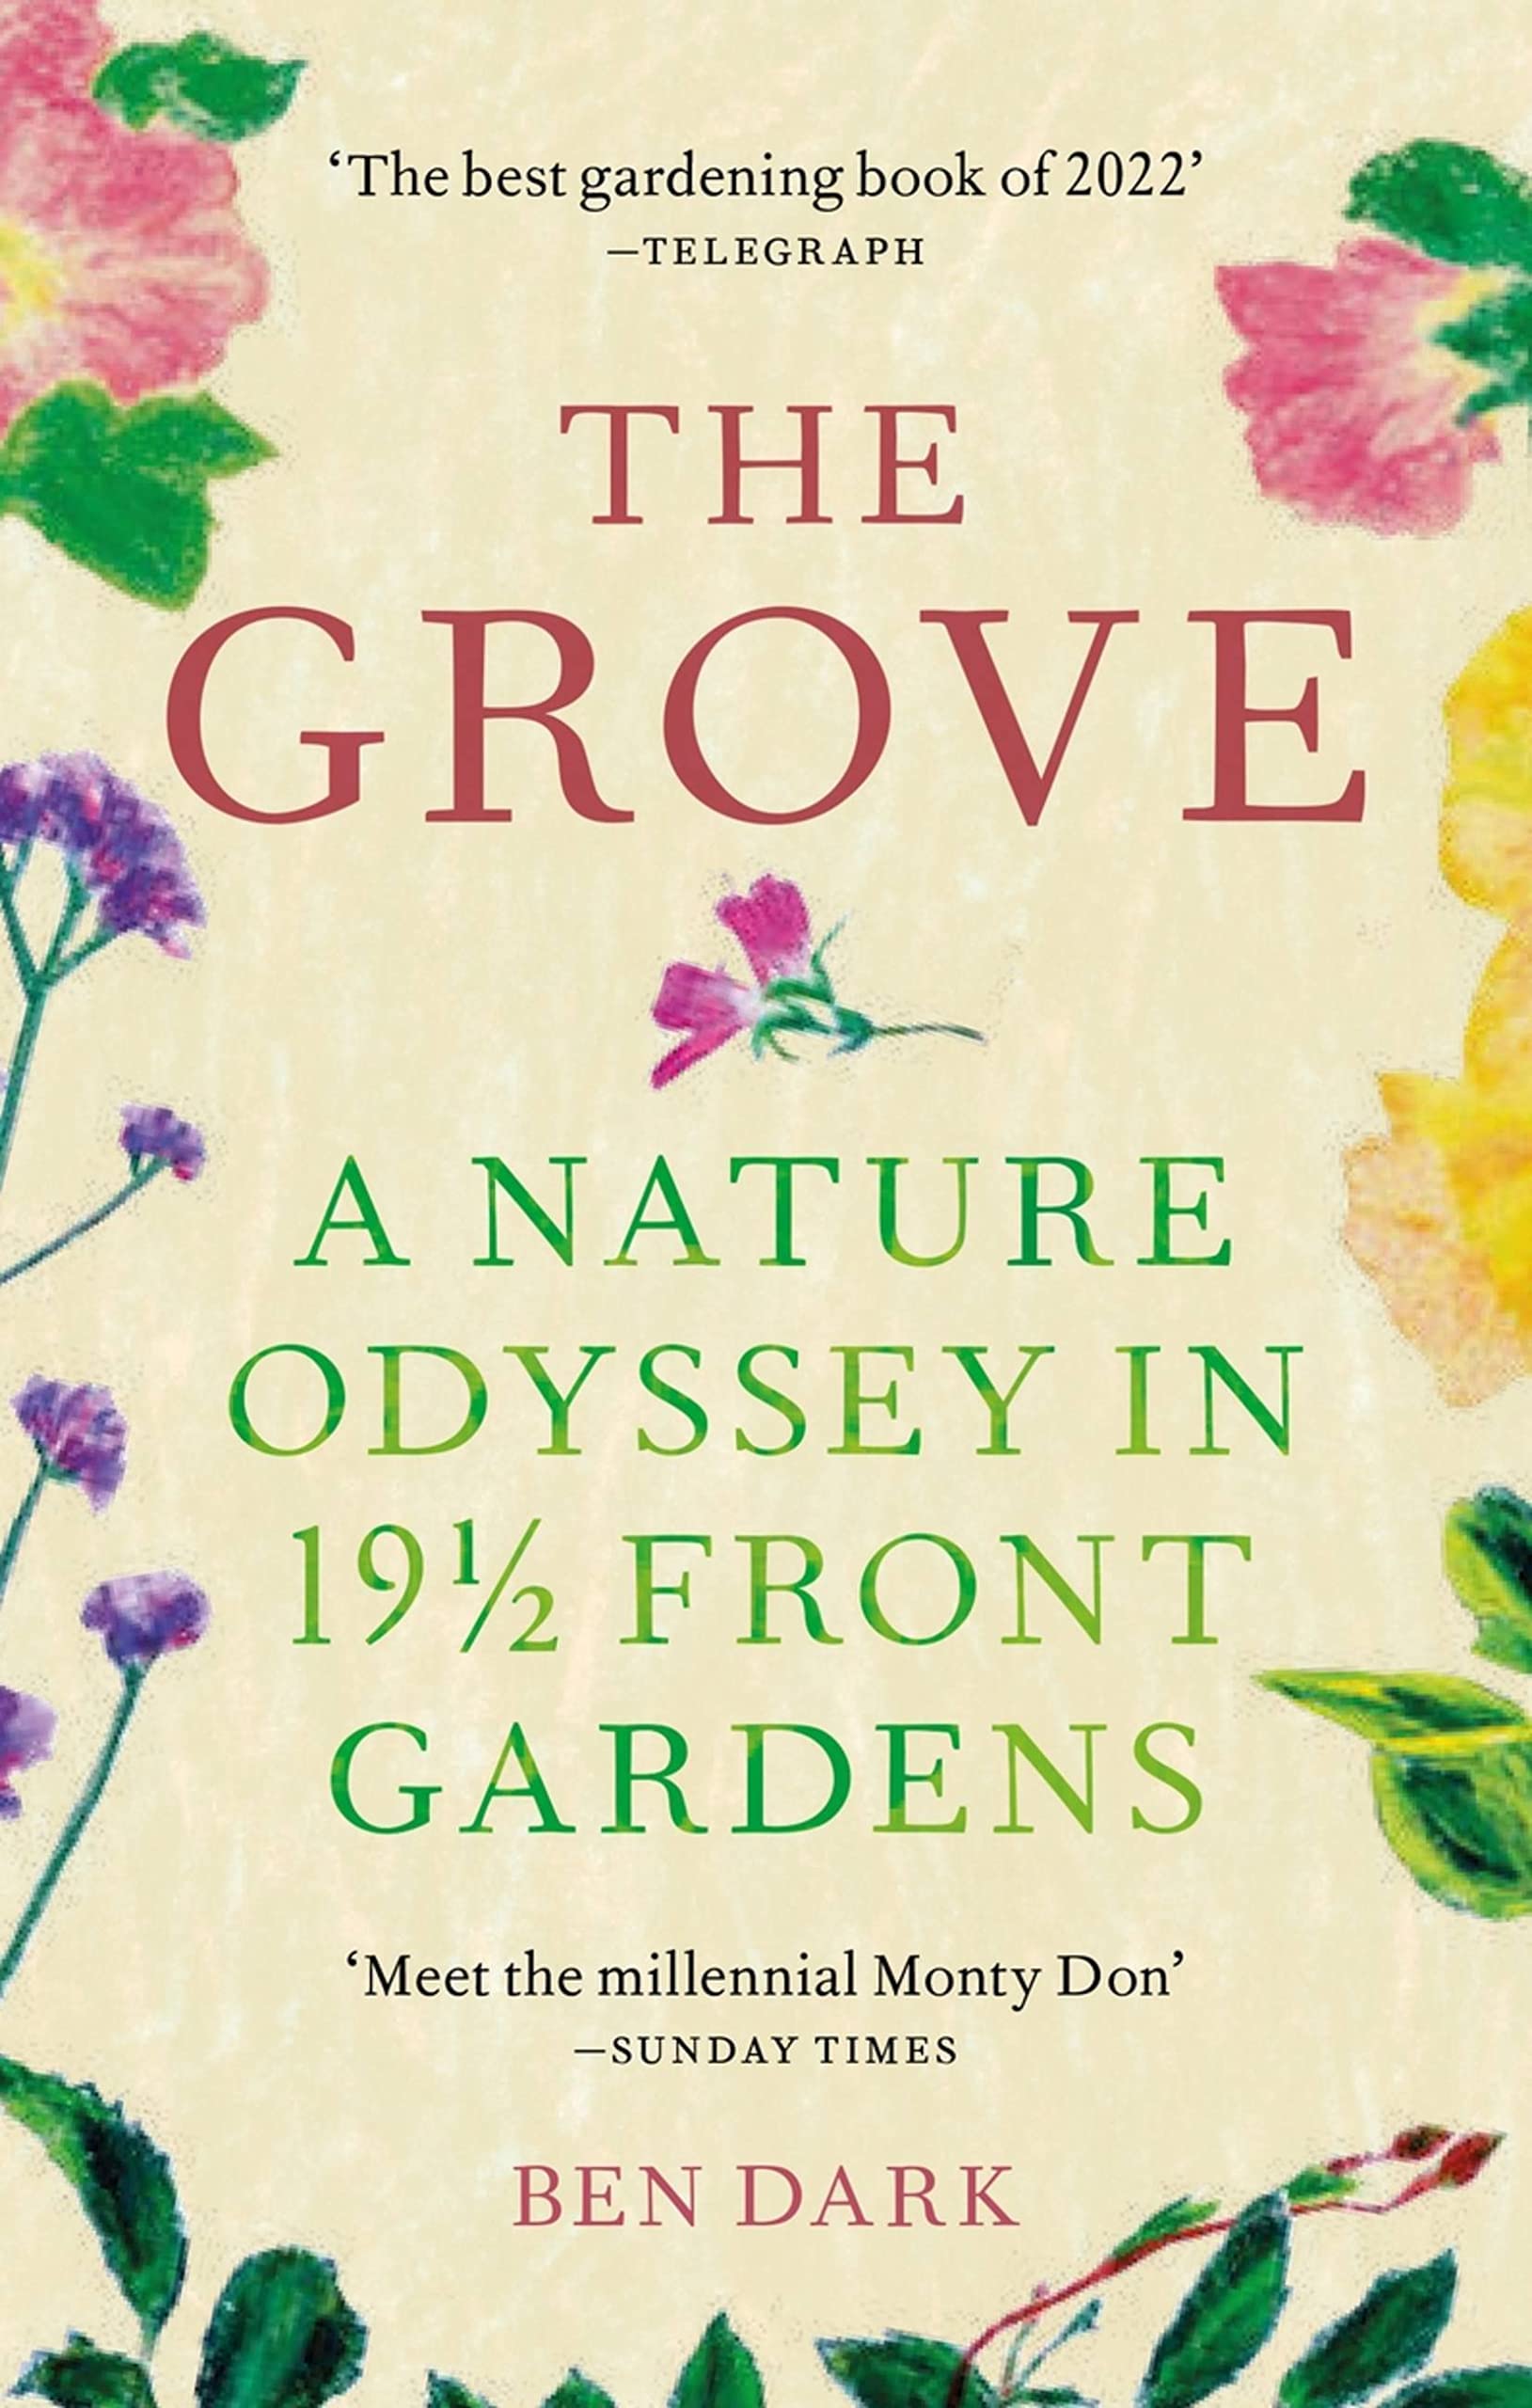 The_Grove_a_nature_odyssey_in_19_half_front_gardens book